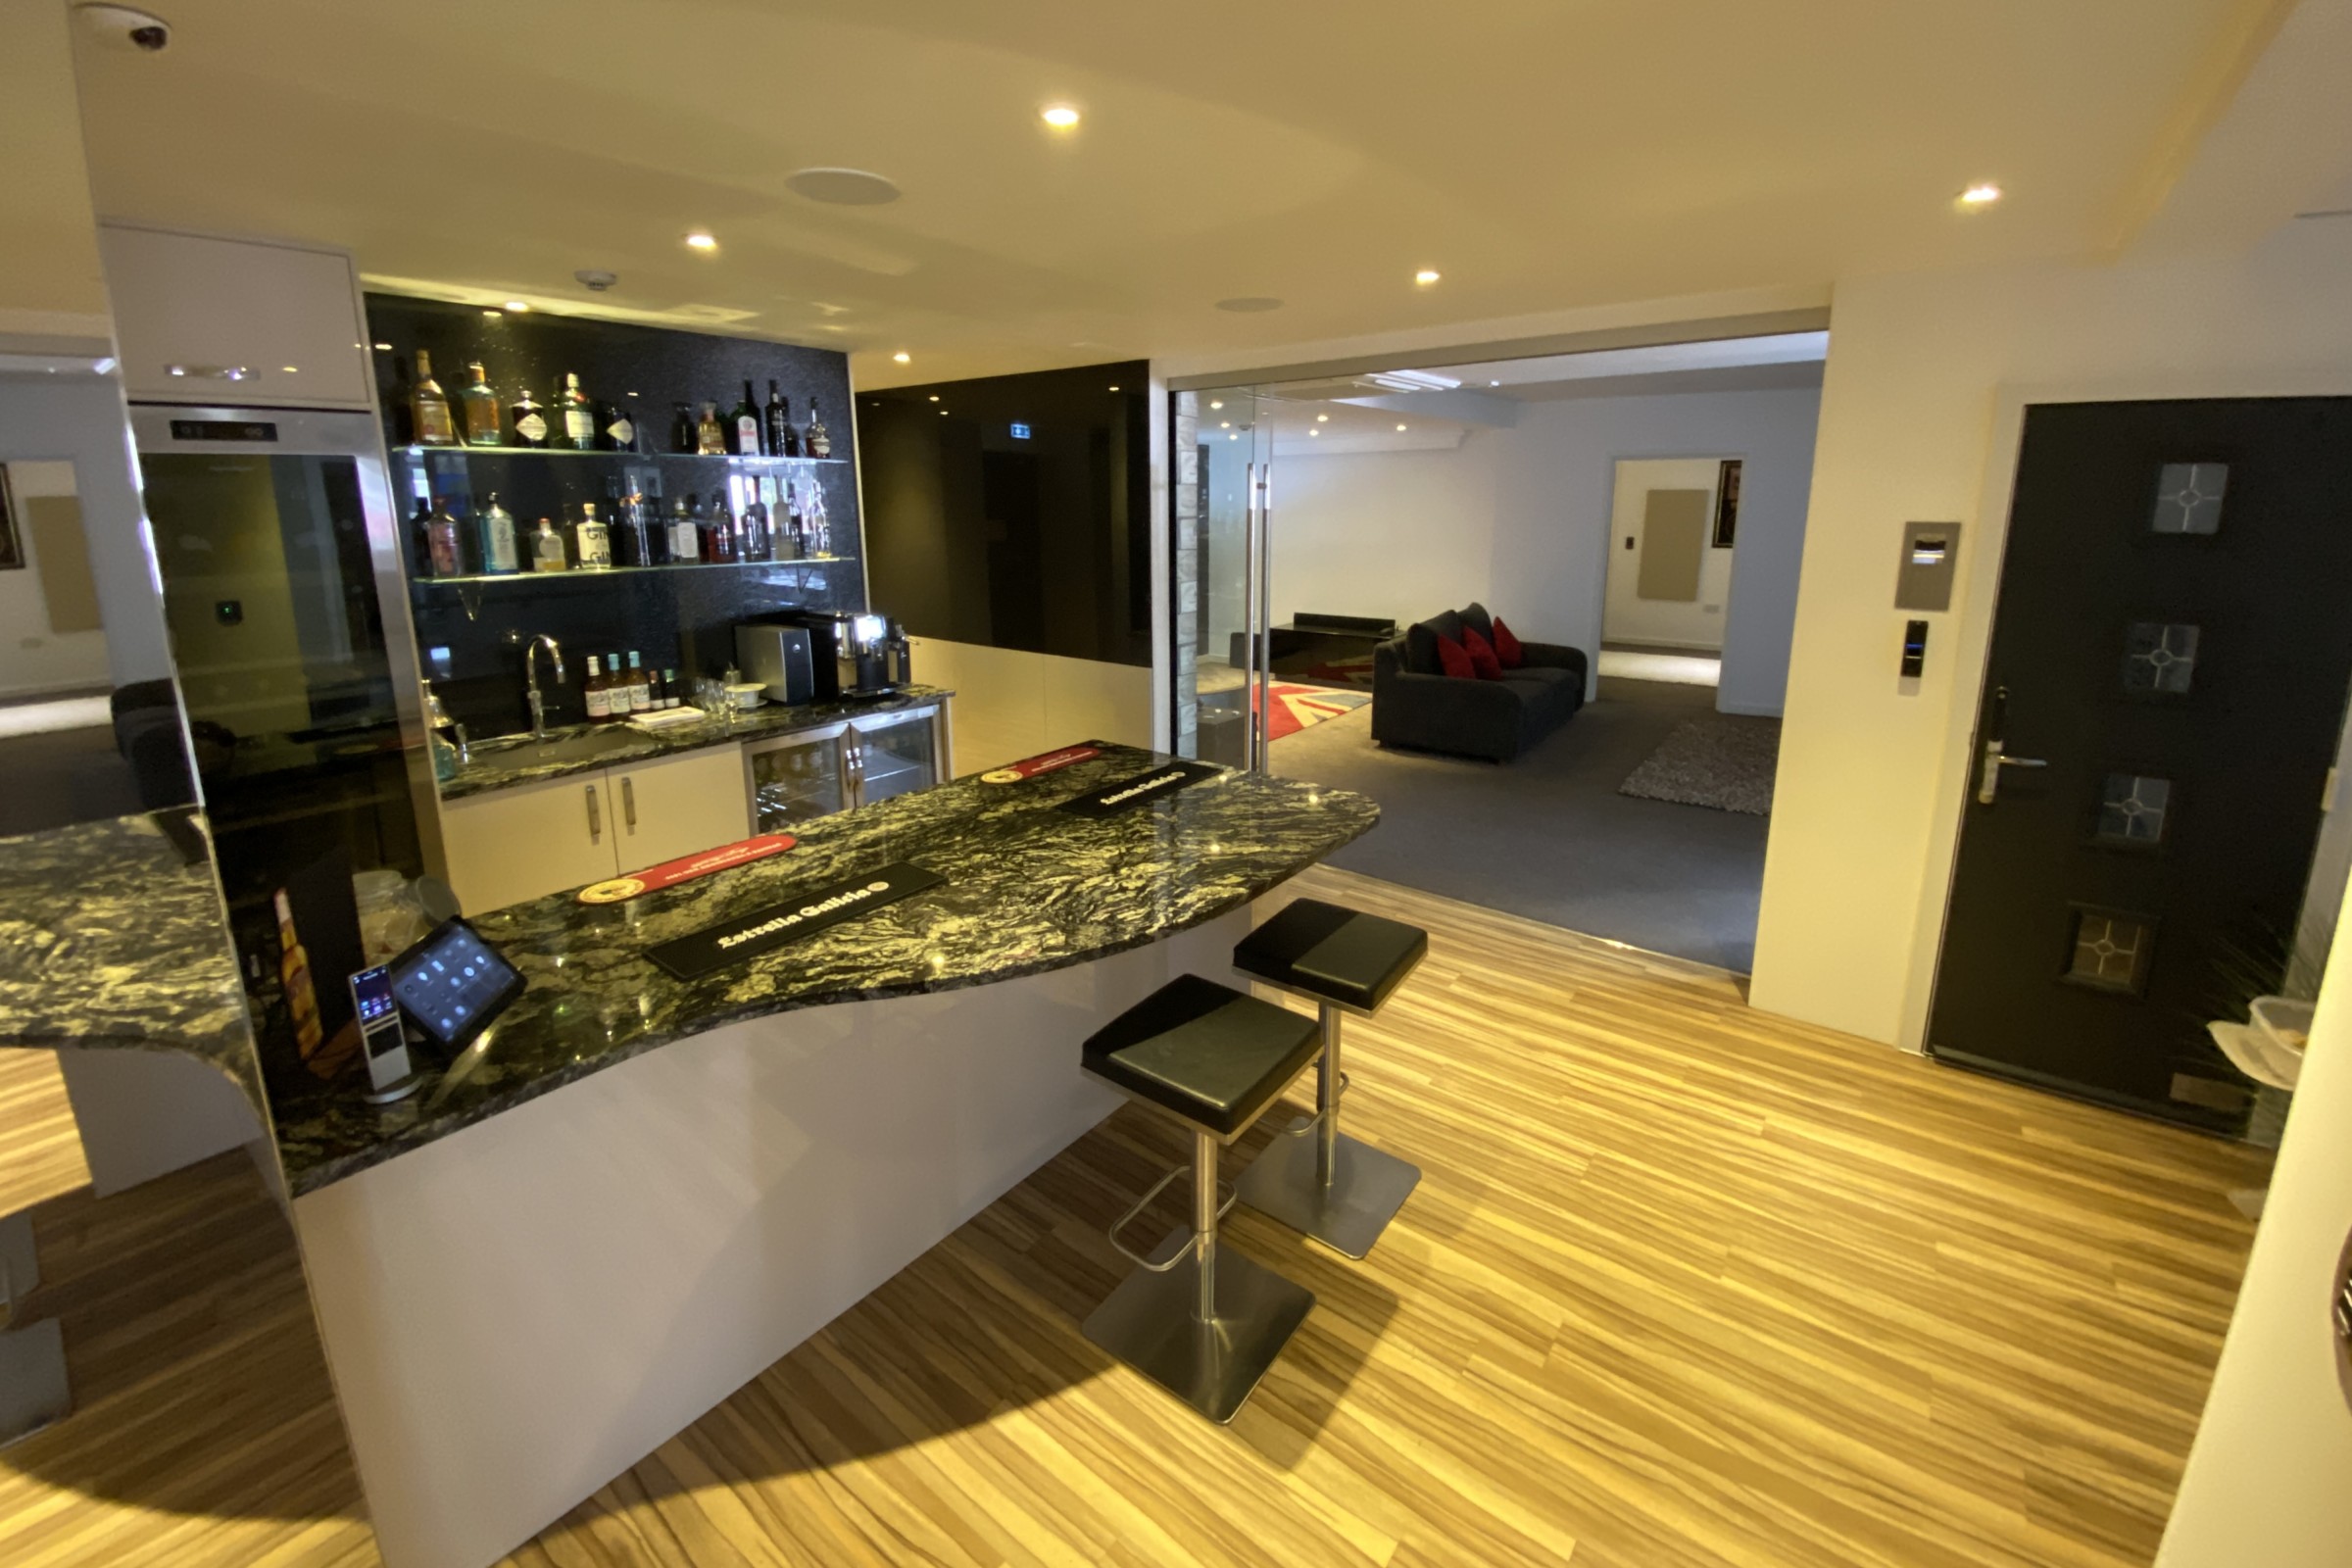 Smart home bar area with built-in cooling appliances and front door with keypad security options